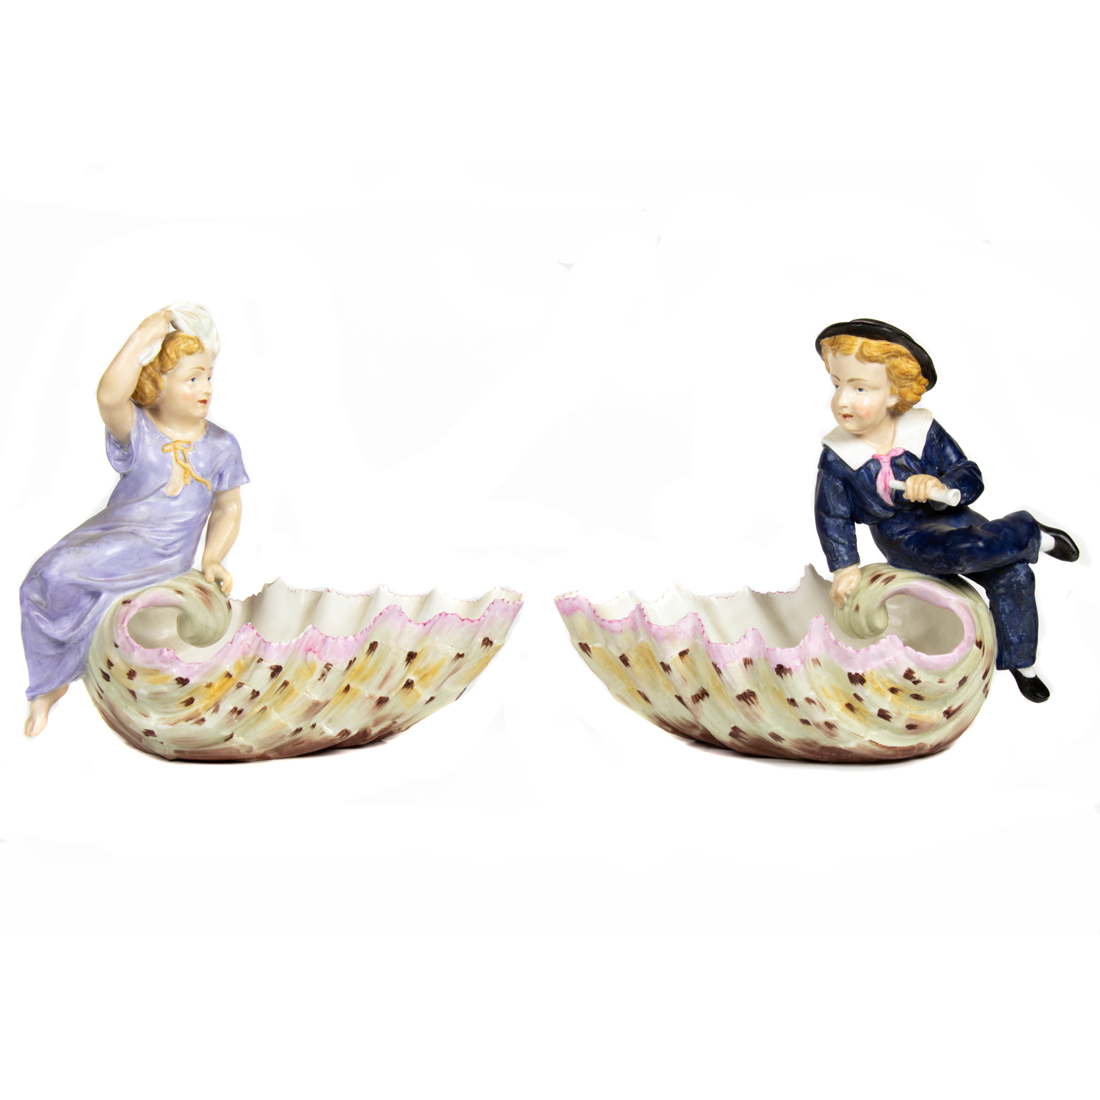 PAIR OF ROYAL CROWN DERBY FIGURAL 3a23e7